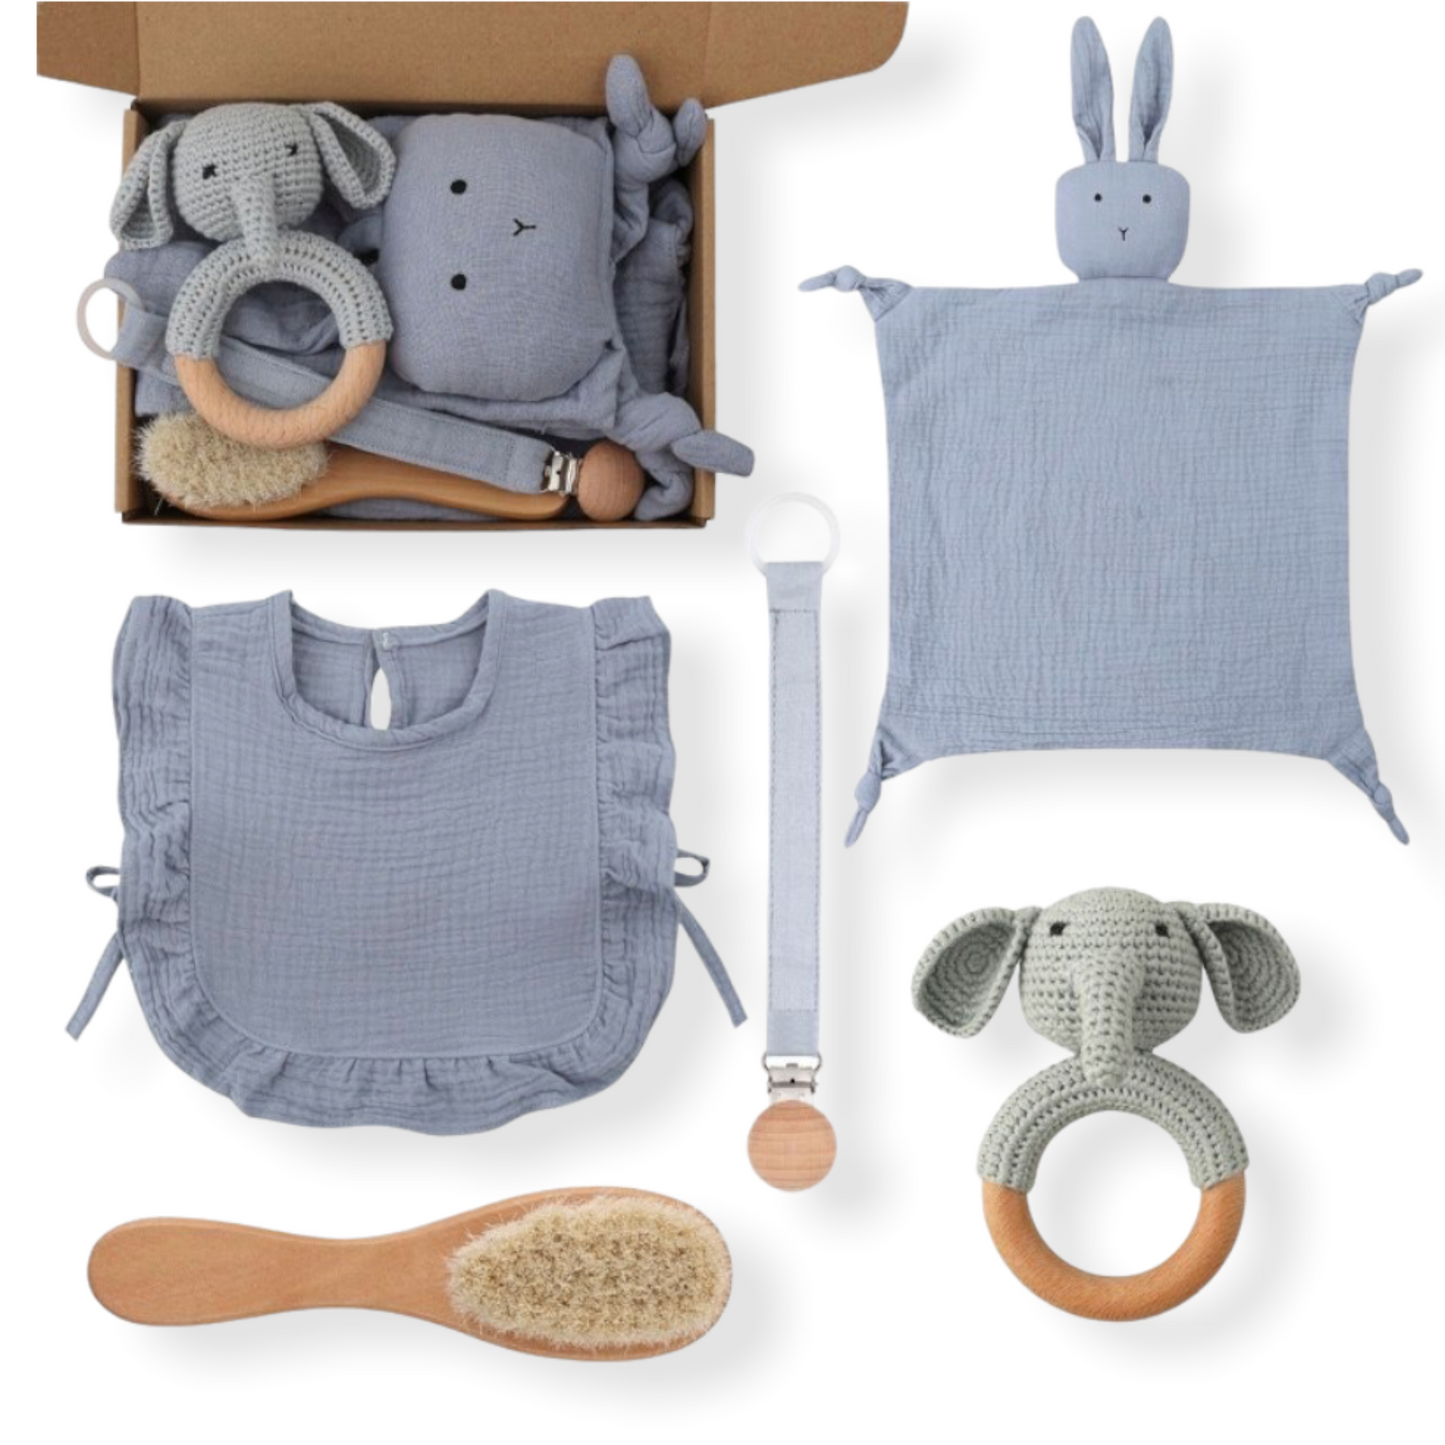 blue Bunny five piece baby gift set for newborns with bib, swaddle, elephant rattle, hair brush and fabric pacifier clip